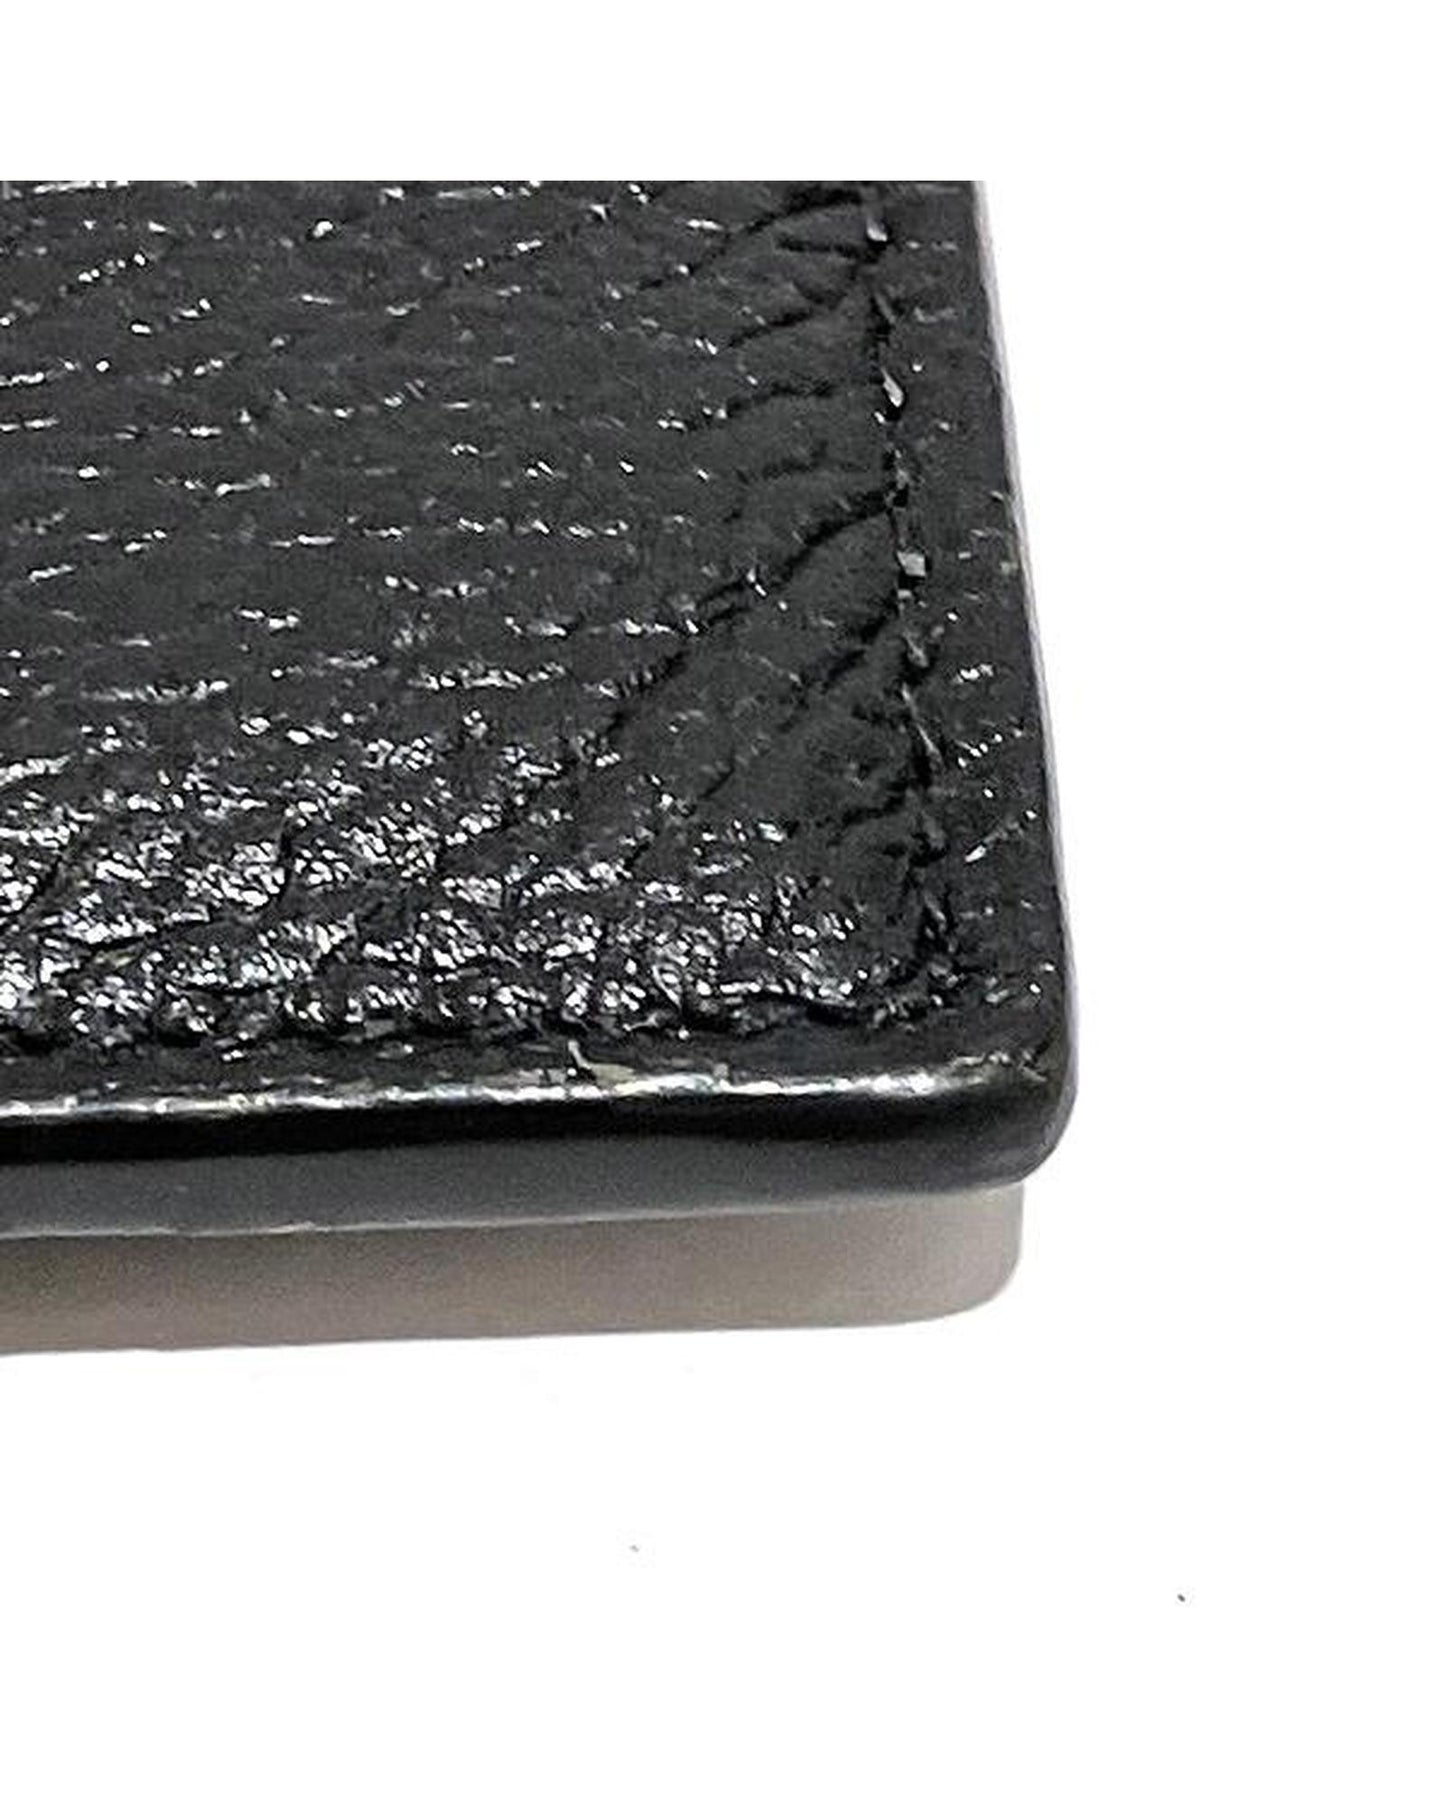 Balenciaga Women's Black Leather Card Case with Strap Wallet in Black